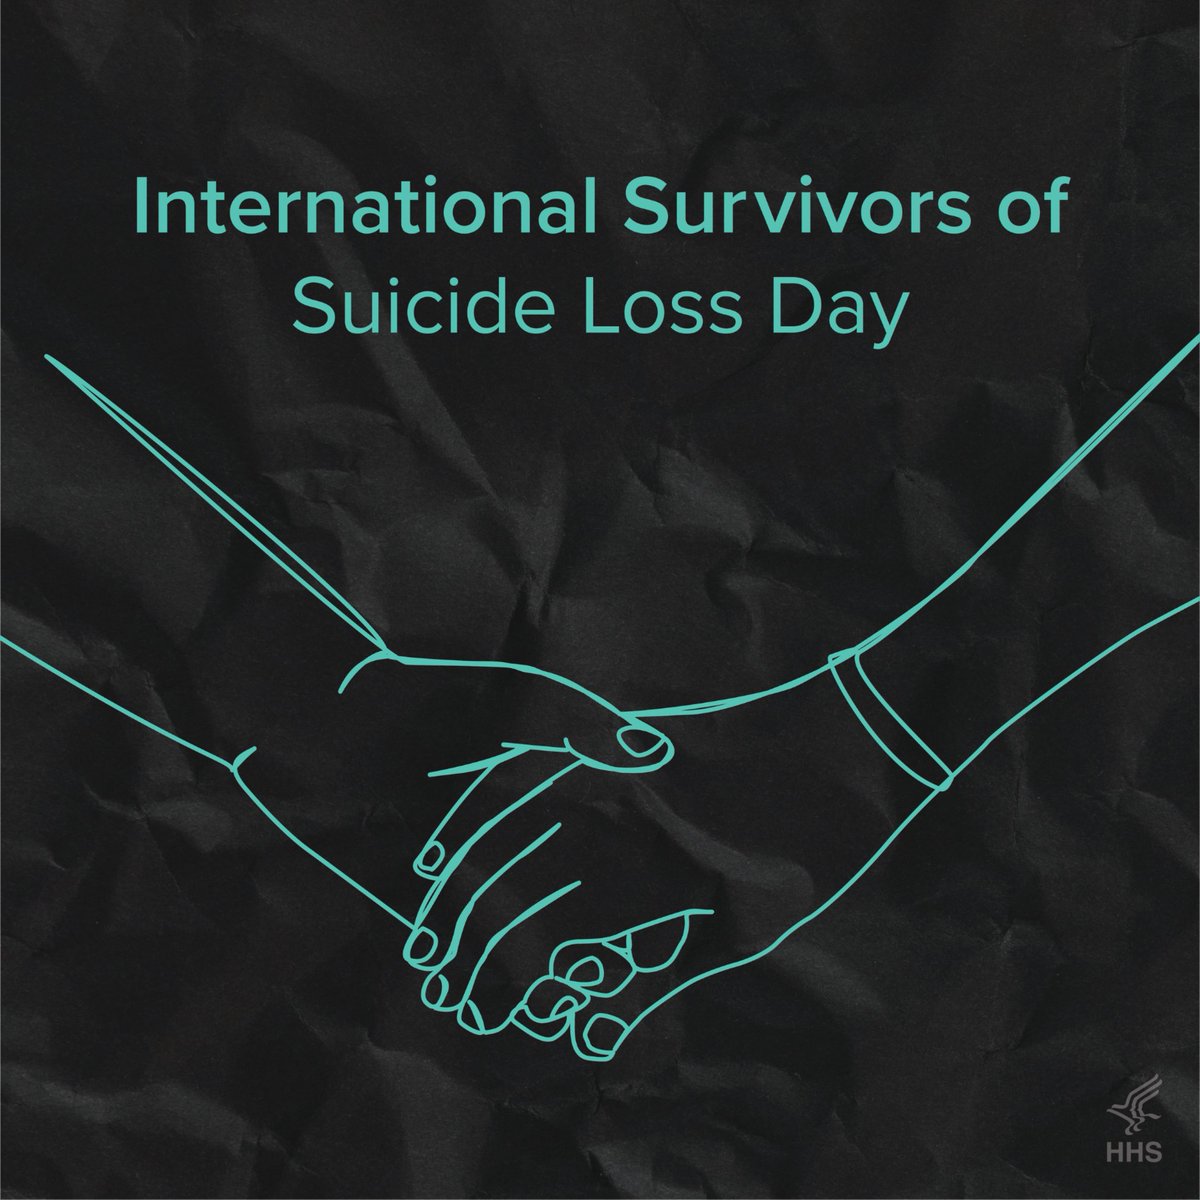 Today is International Survivors of Suicide Loss Day, a day to remember & support those who have endured the pain of losing someone to suicide. You are never alone in your journey through grief and healing. If you or someone you know needs support, visit 988lifeline.org.